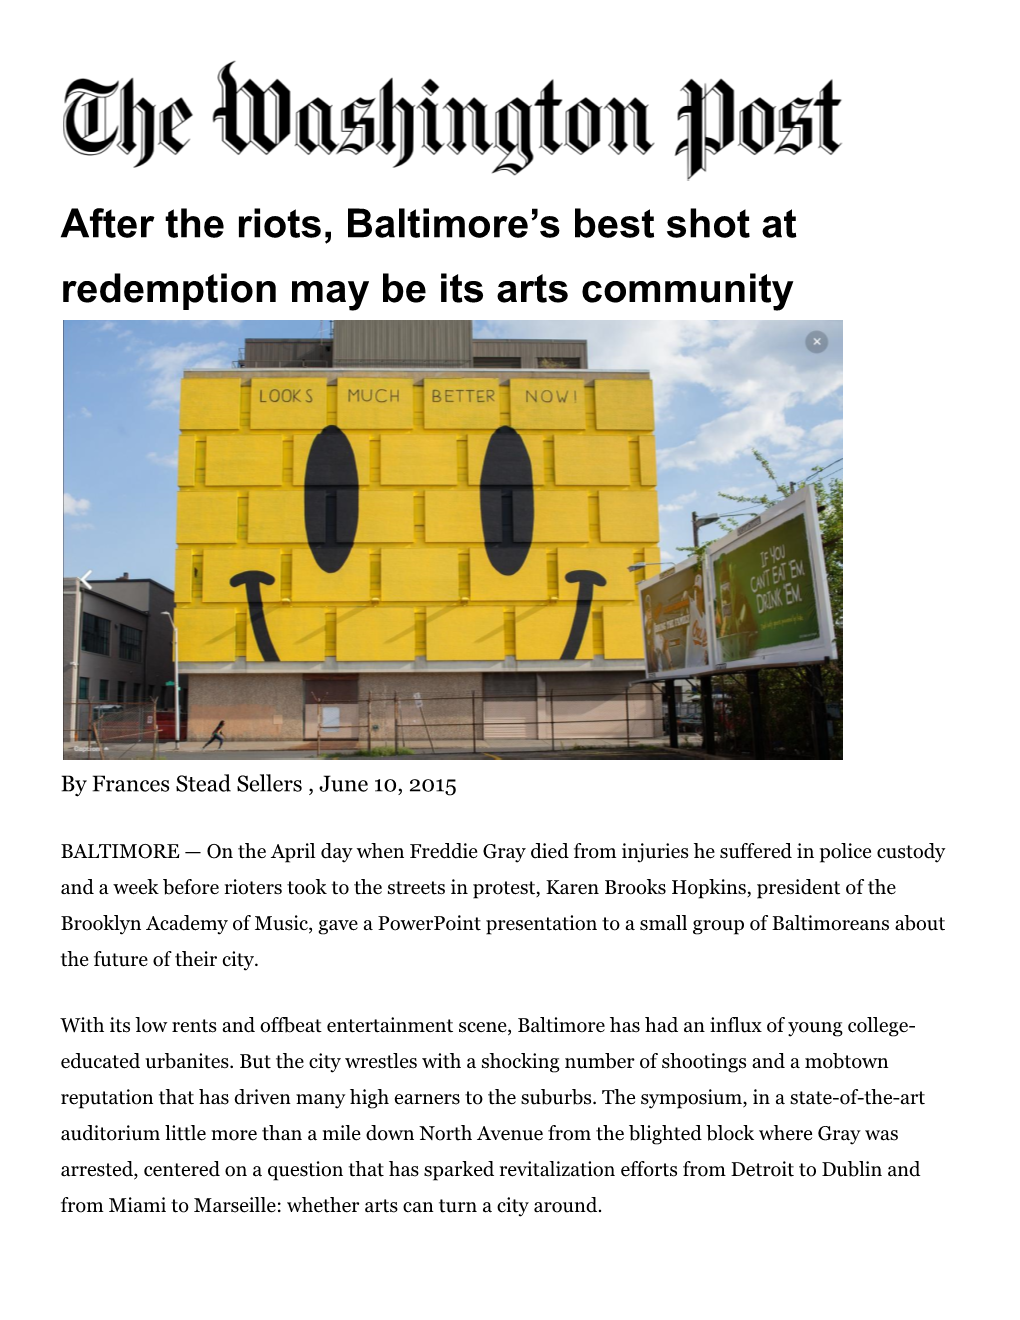 After the Riots, Baltimore's Best Shot at Redemption May Be Its Arts Community